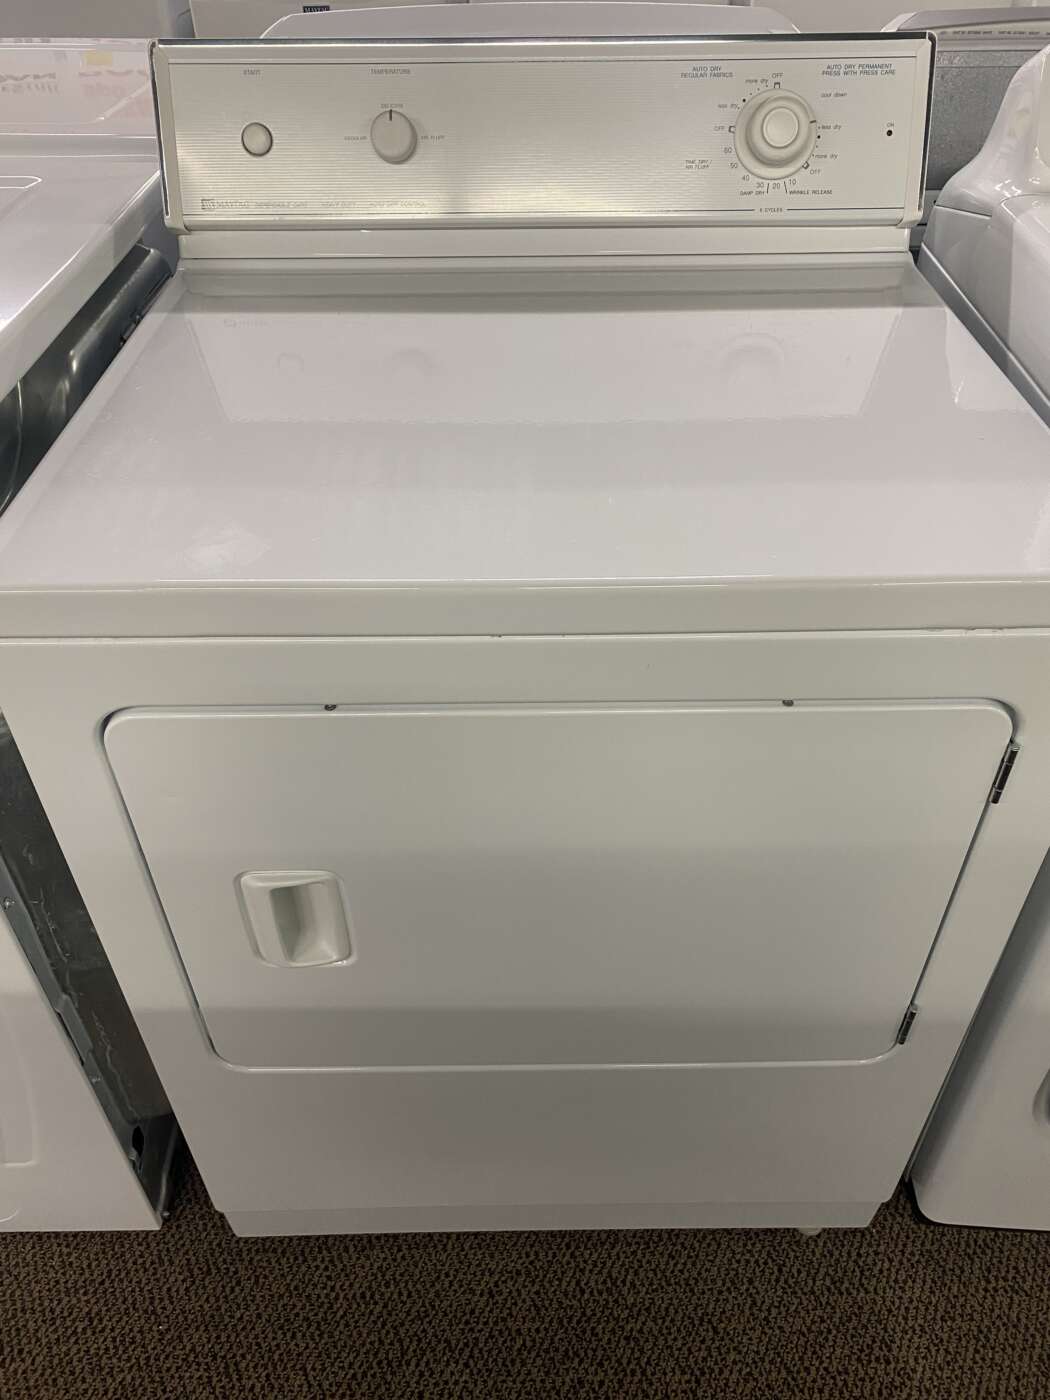 Reconditioned MAYTAG Electric Dryer